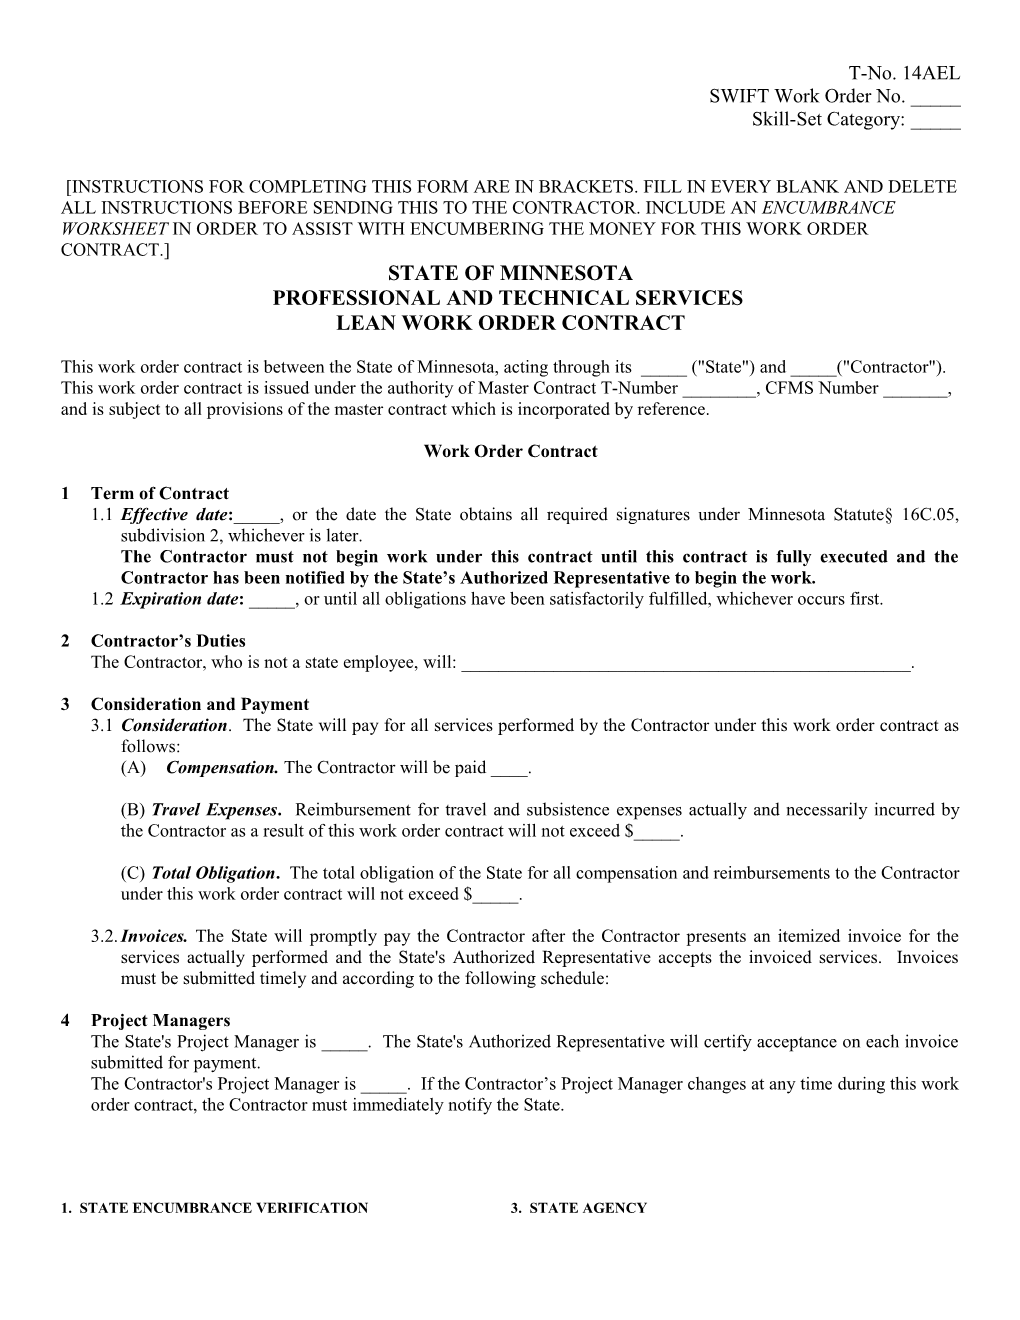 Professional and Technical Services Contract - Template